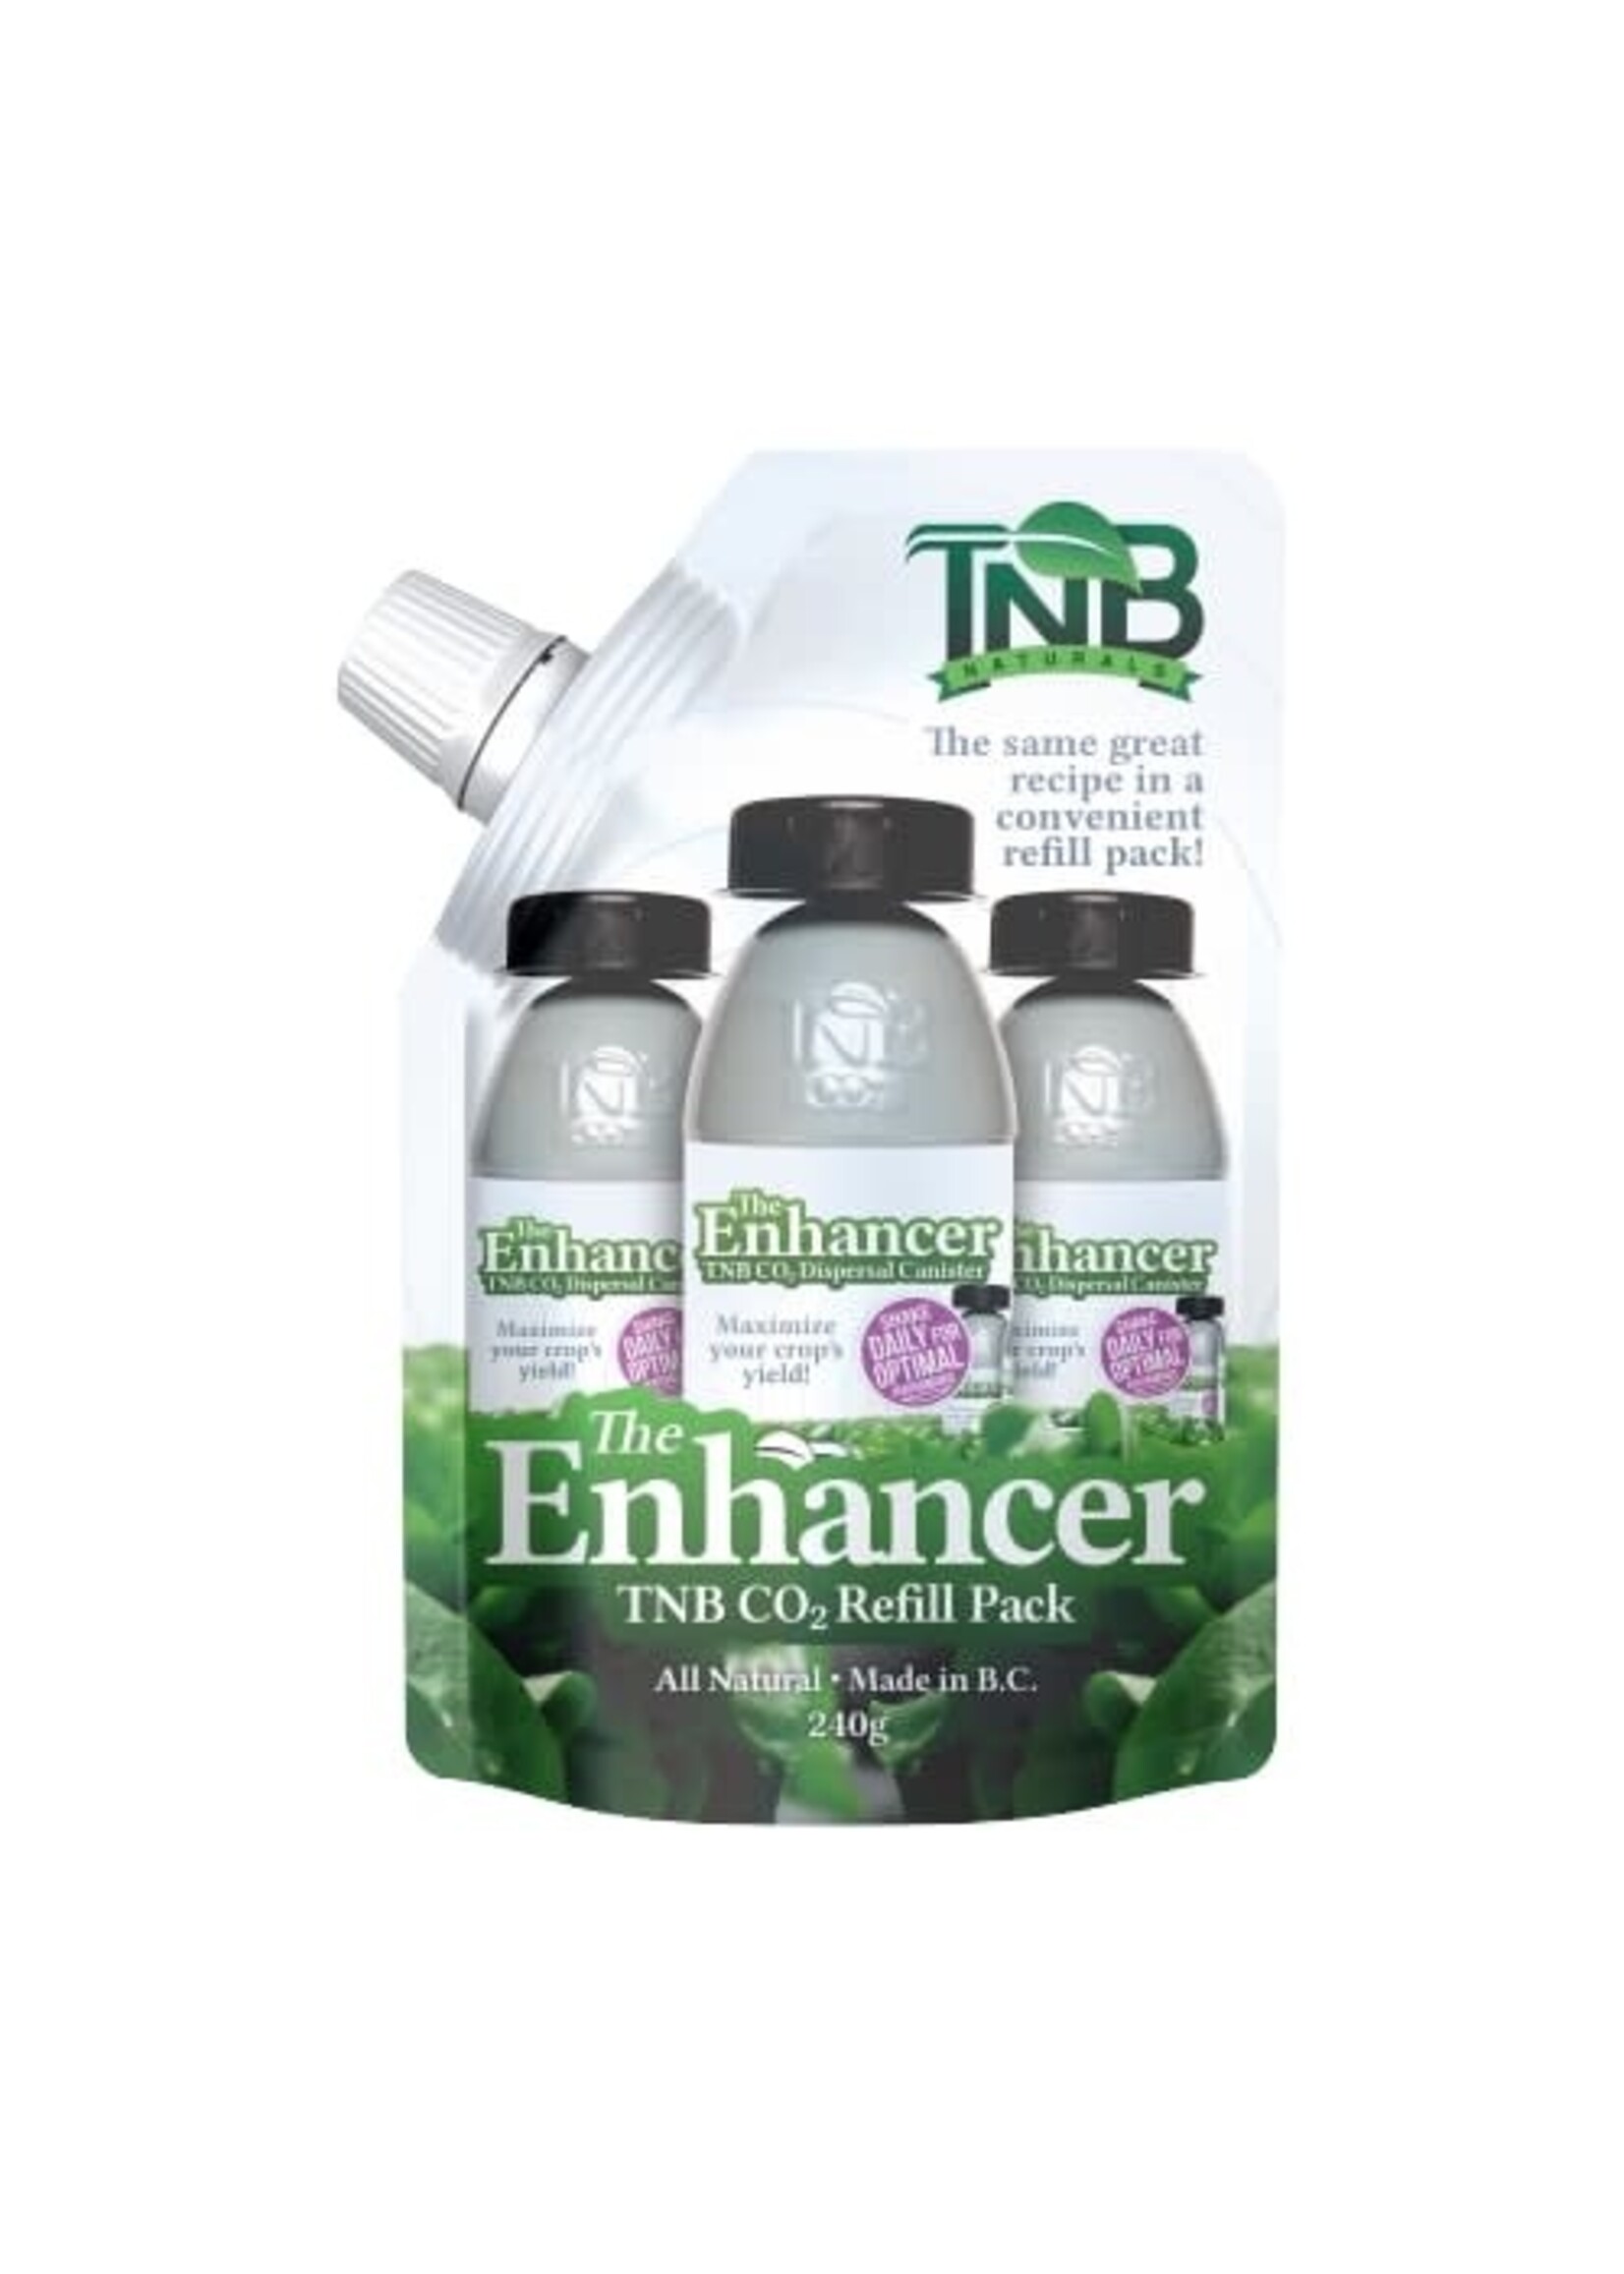 TNB TNB The Enhancer C02 Dispersal canister Refill Pack